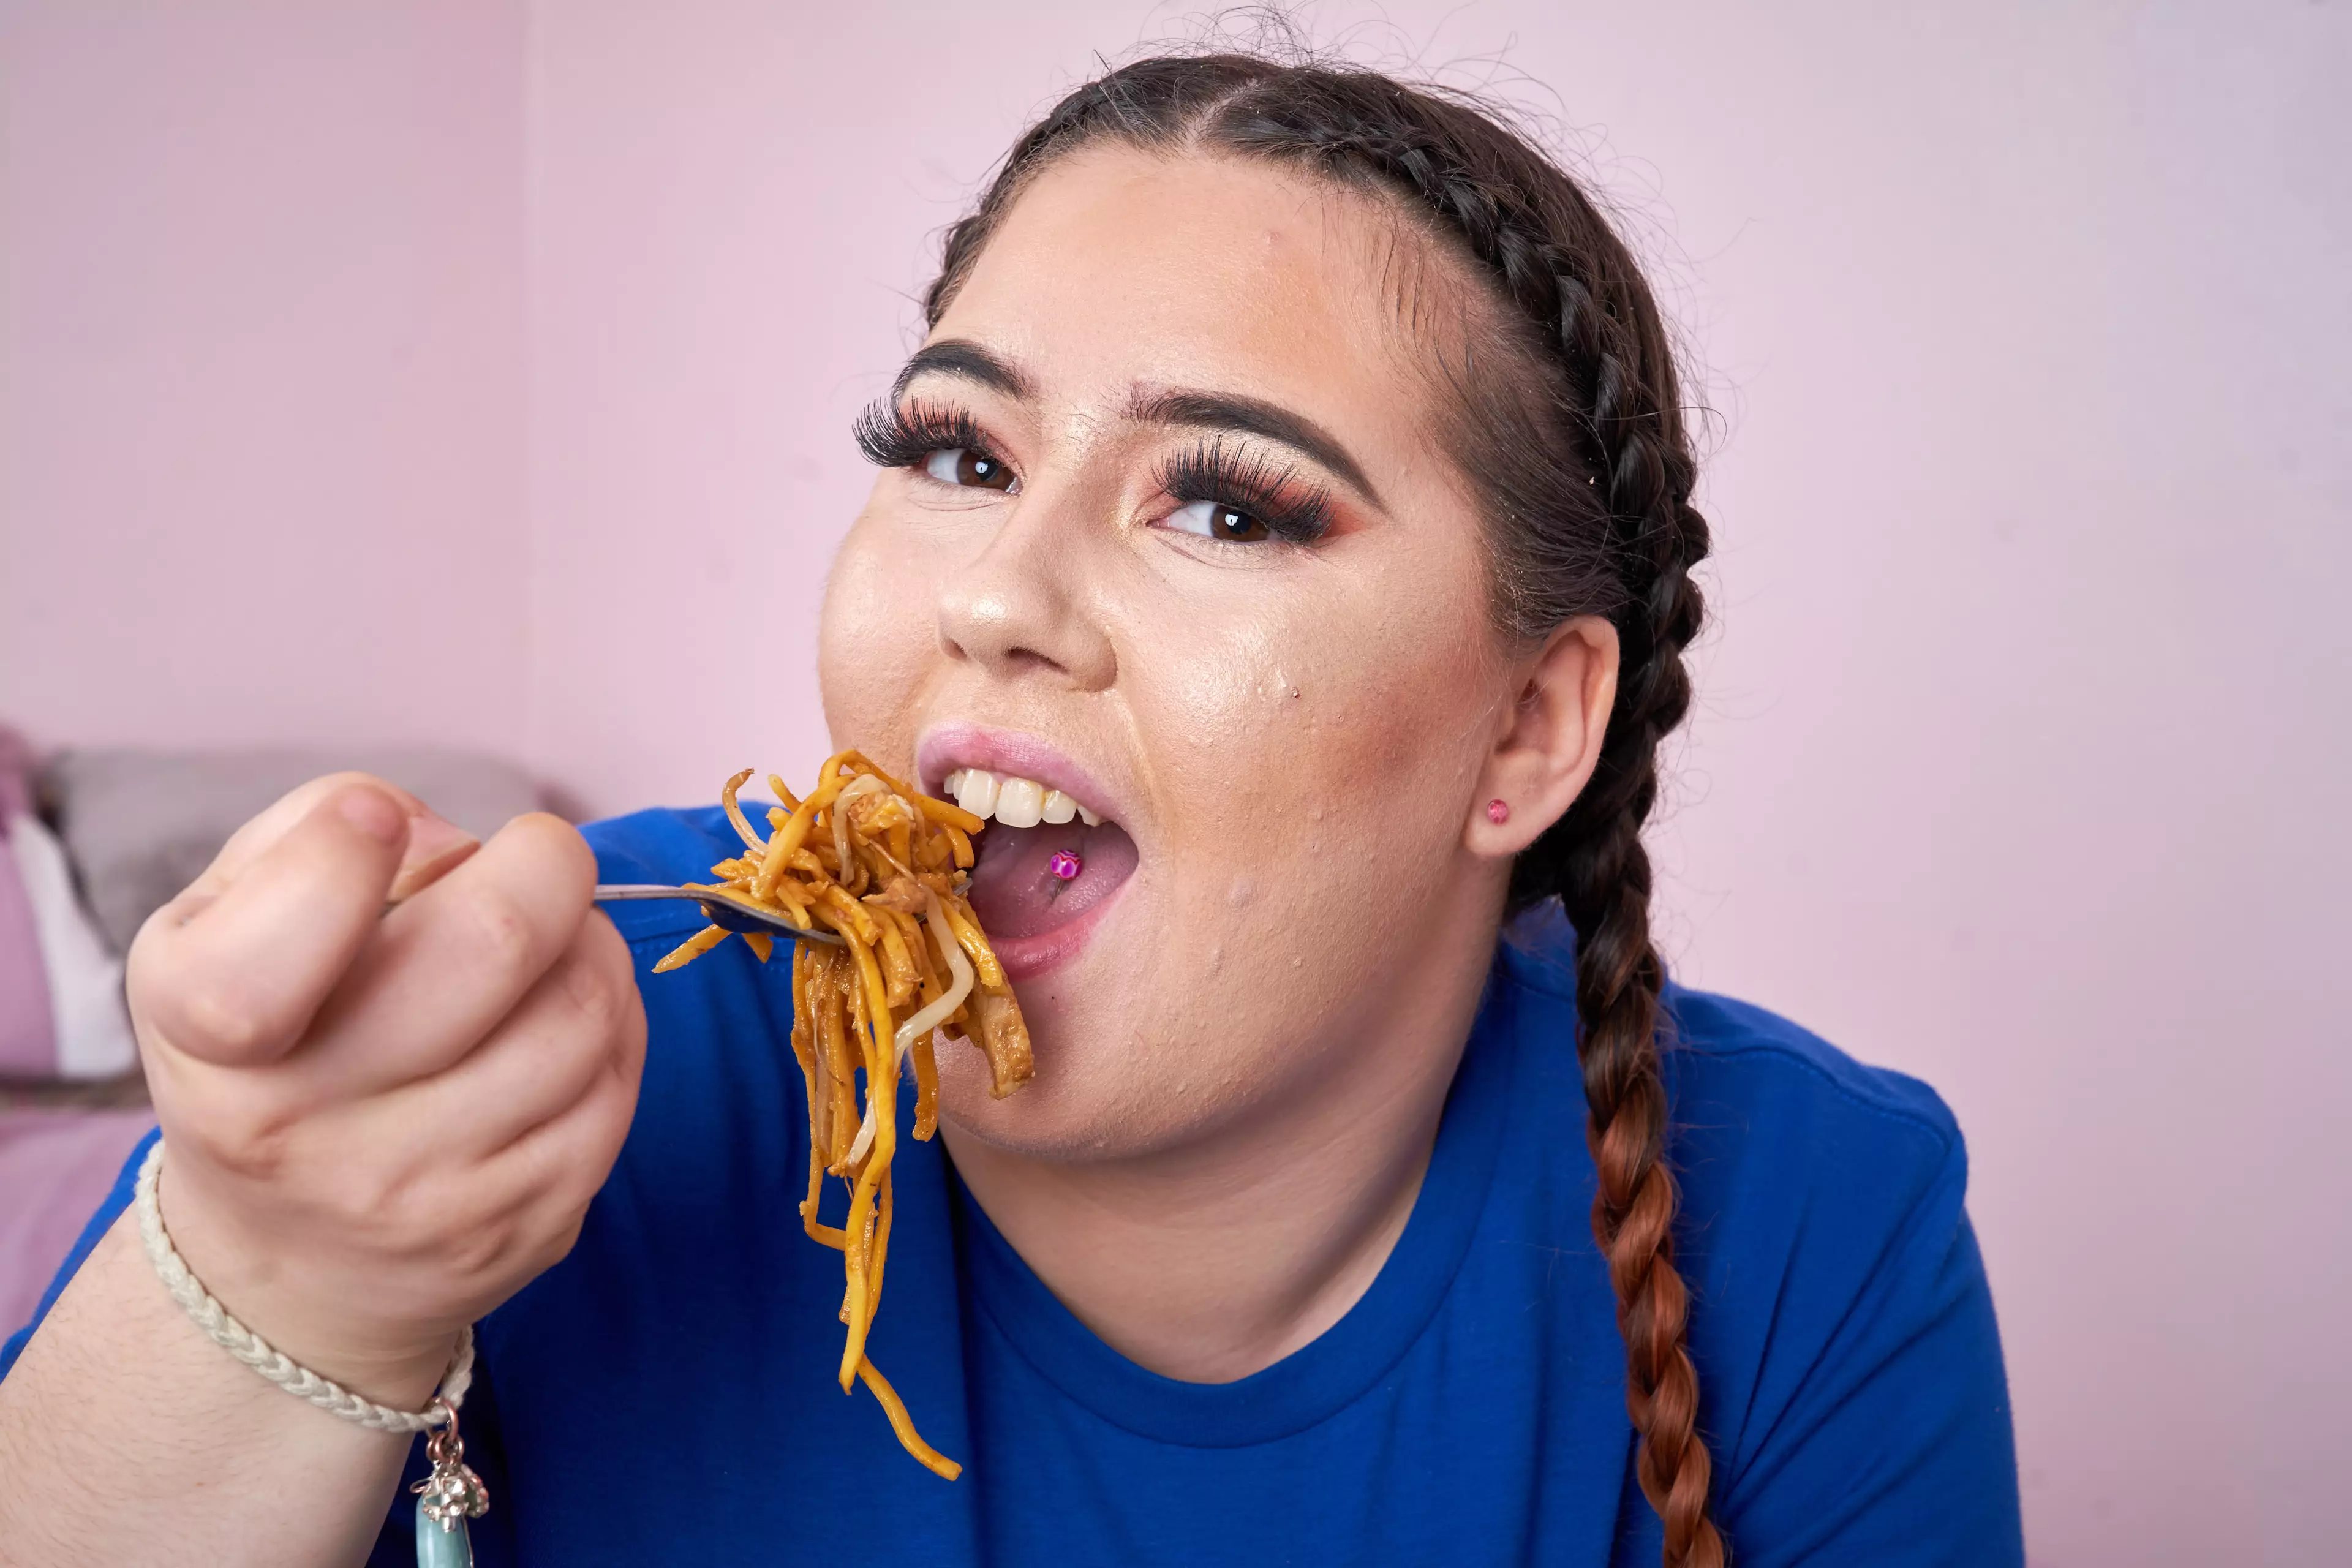 Charna is hoping to make eating challenges a permanent career (